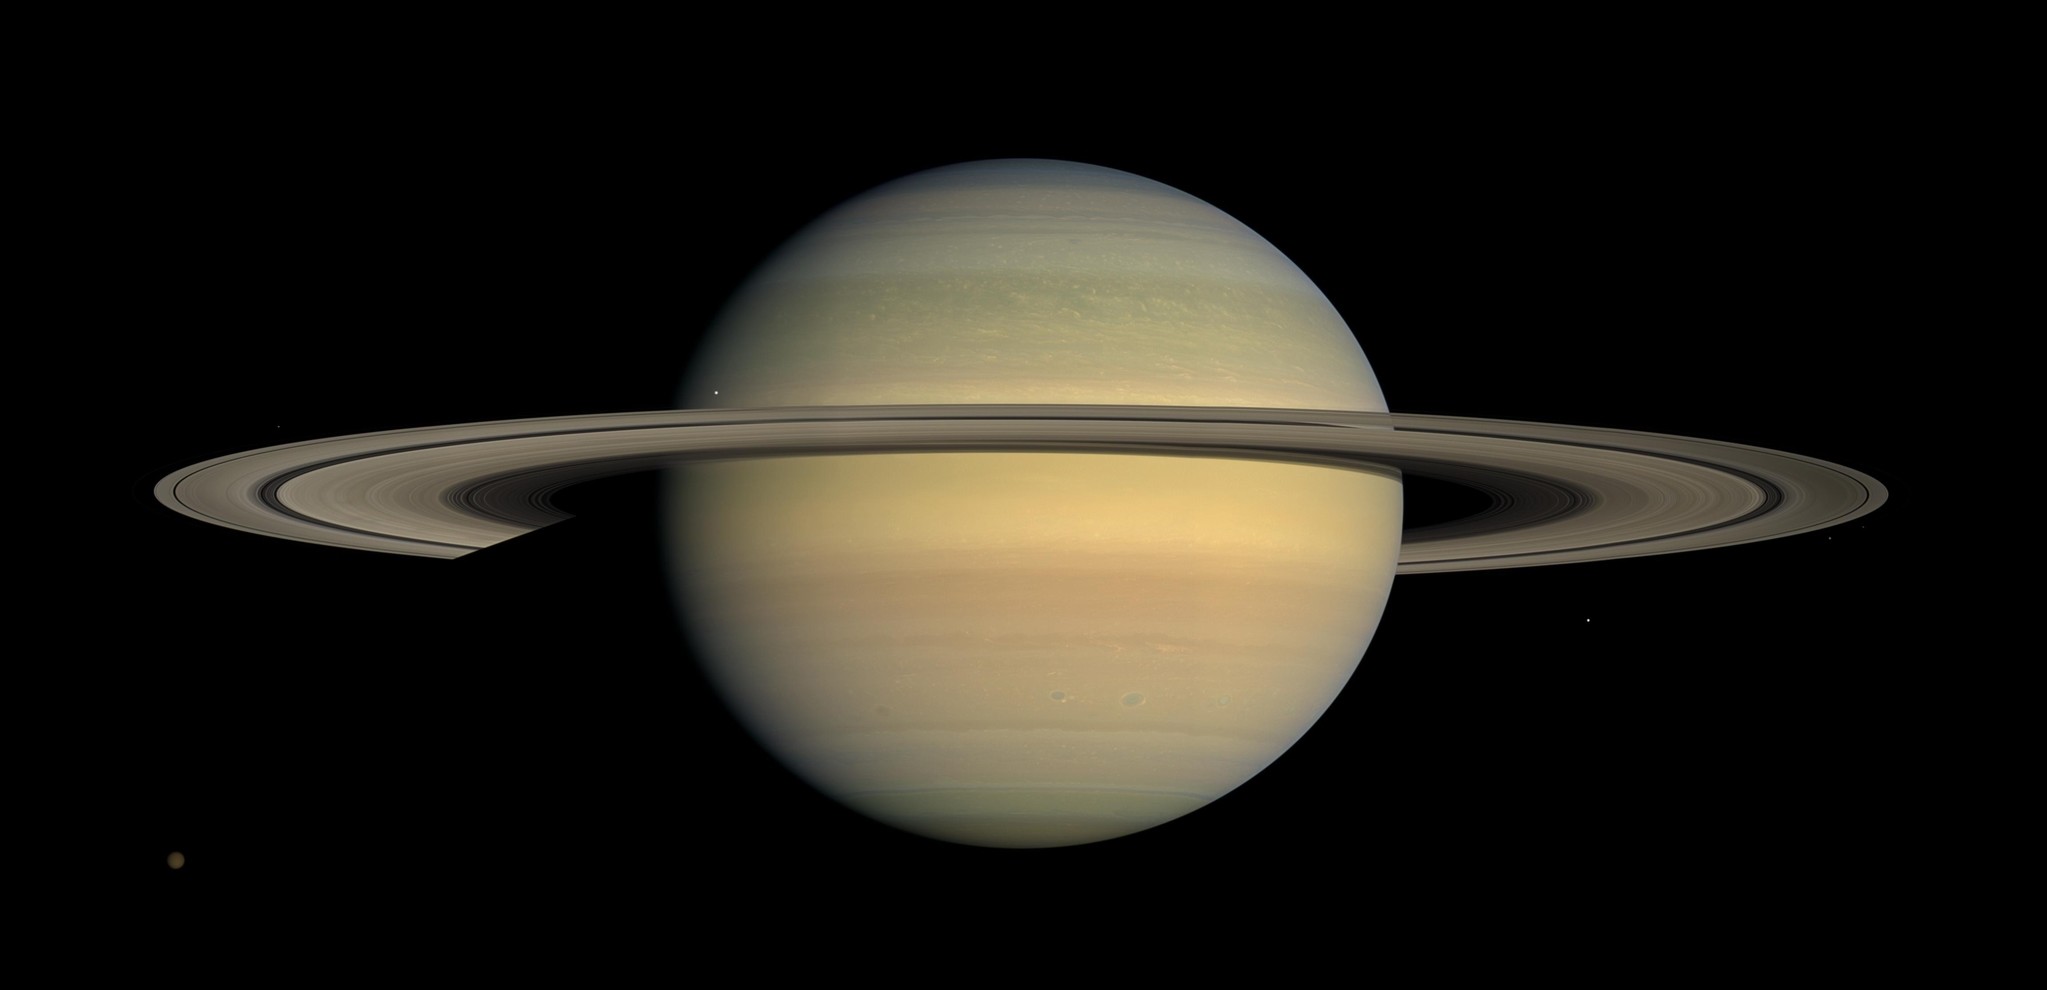 This July 23, 2008 image made available by NASA shows the planet Saturn, as seen from the Cassini spacecraft. (AP Photo)